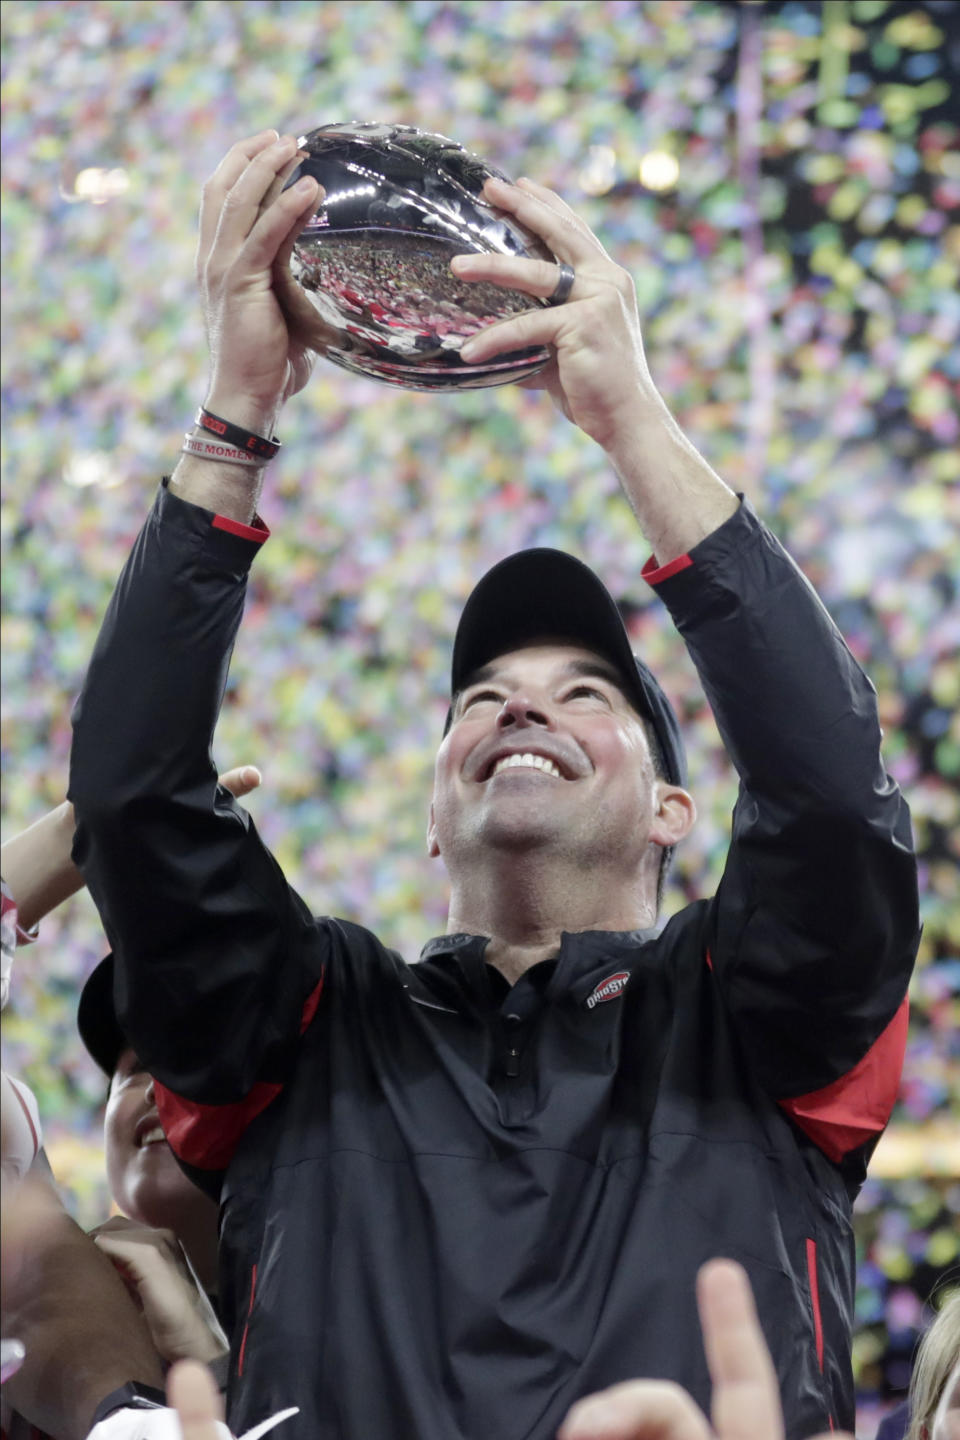 Ohio State coach Ryan Day holds the trophy following the Big Ten championship NCAA college football game against Wisconsin, early Sunday, Dec. 8, 2019, in Indianapolis. Ohio State won 34-21. (AP Photo/Michael Conroy)